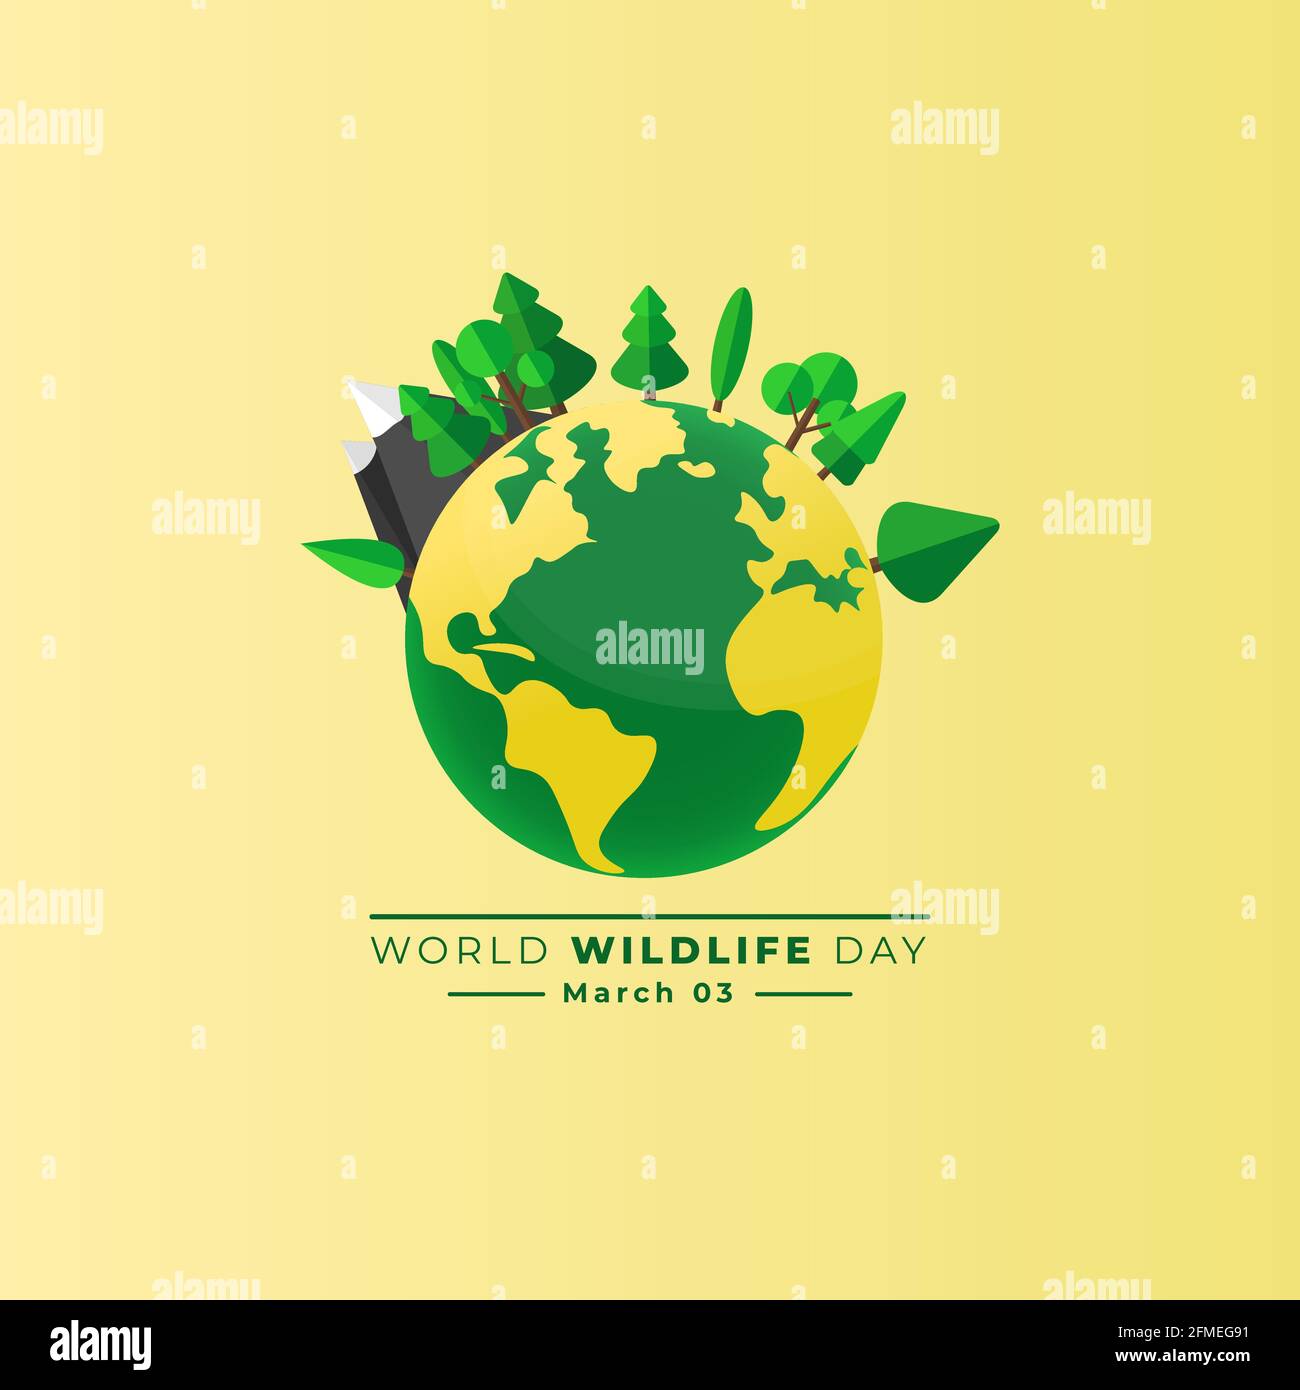 World wildlife day design with green earth vector illustration. good template for wildlife day or environmental design Stock Vector